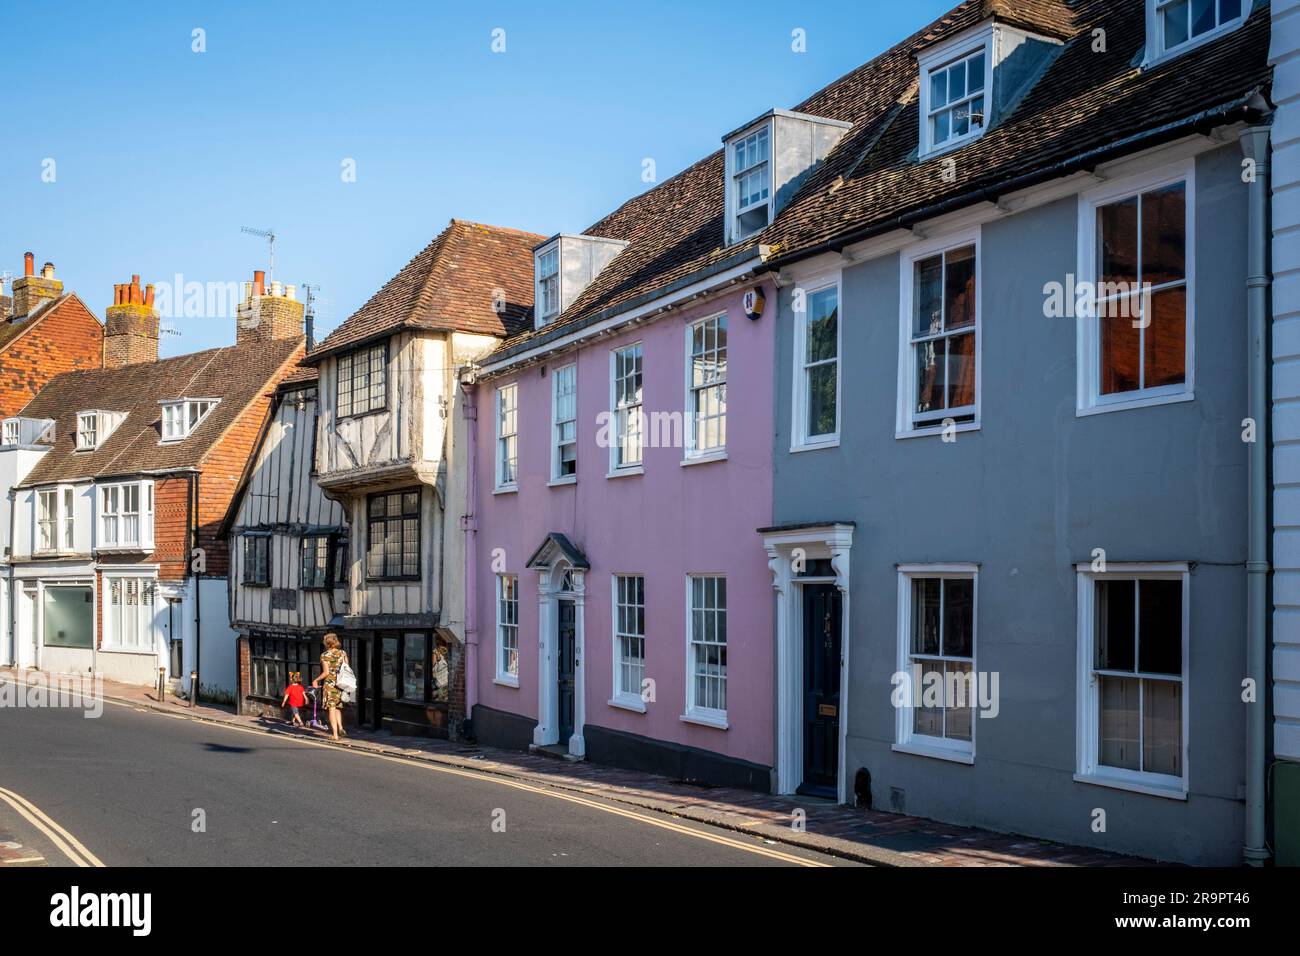 Colourful Houses in Lewes High Street, Lewes, East Sussex, Regno Unito. Foto Stock